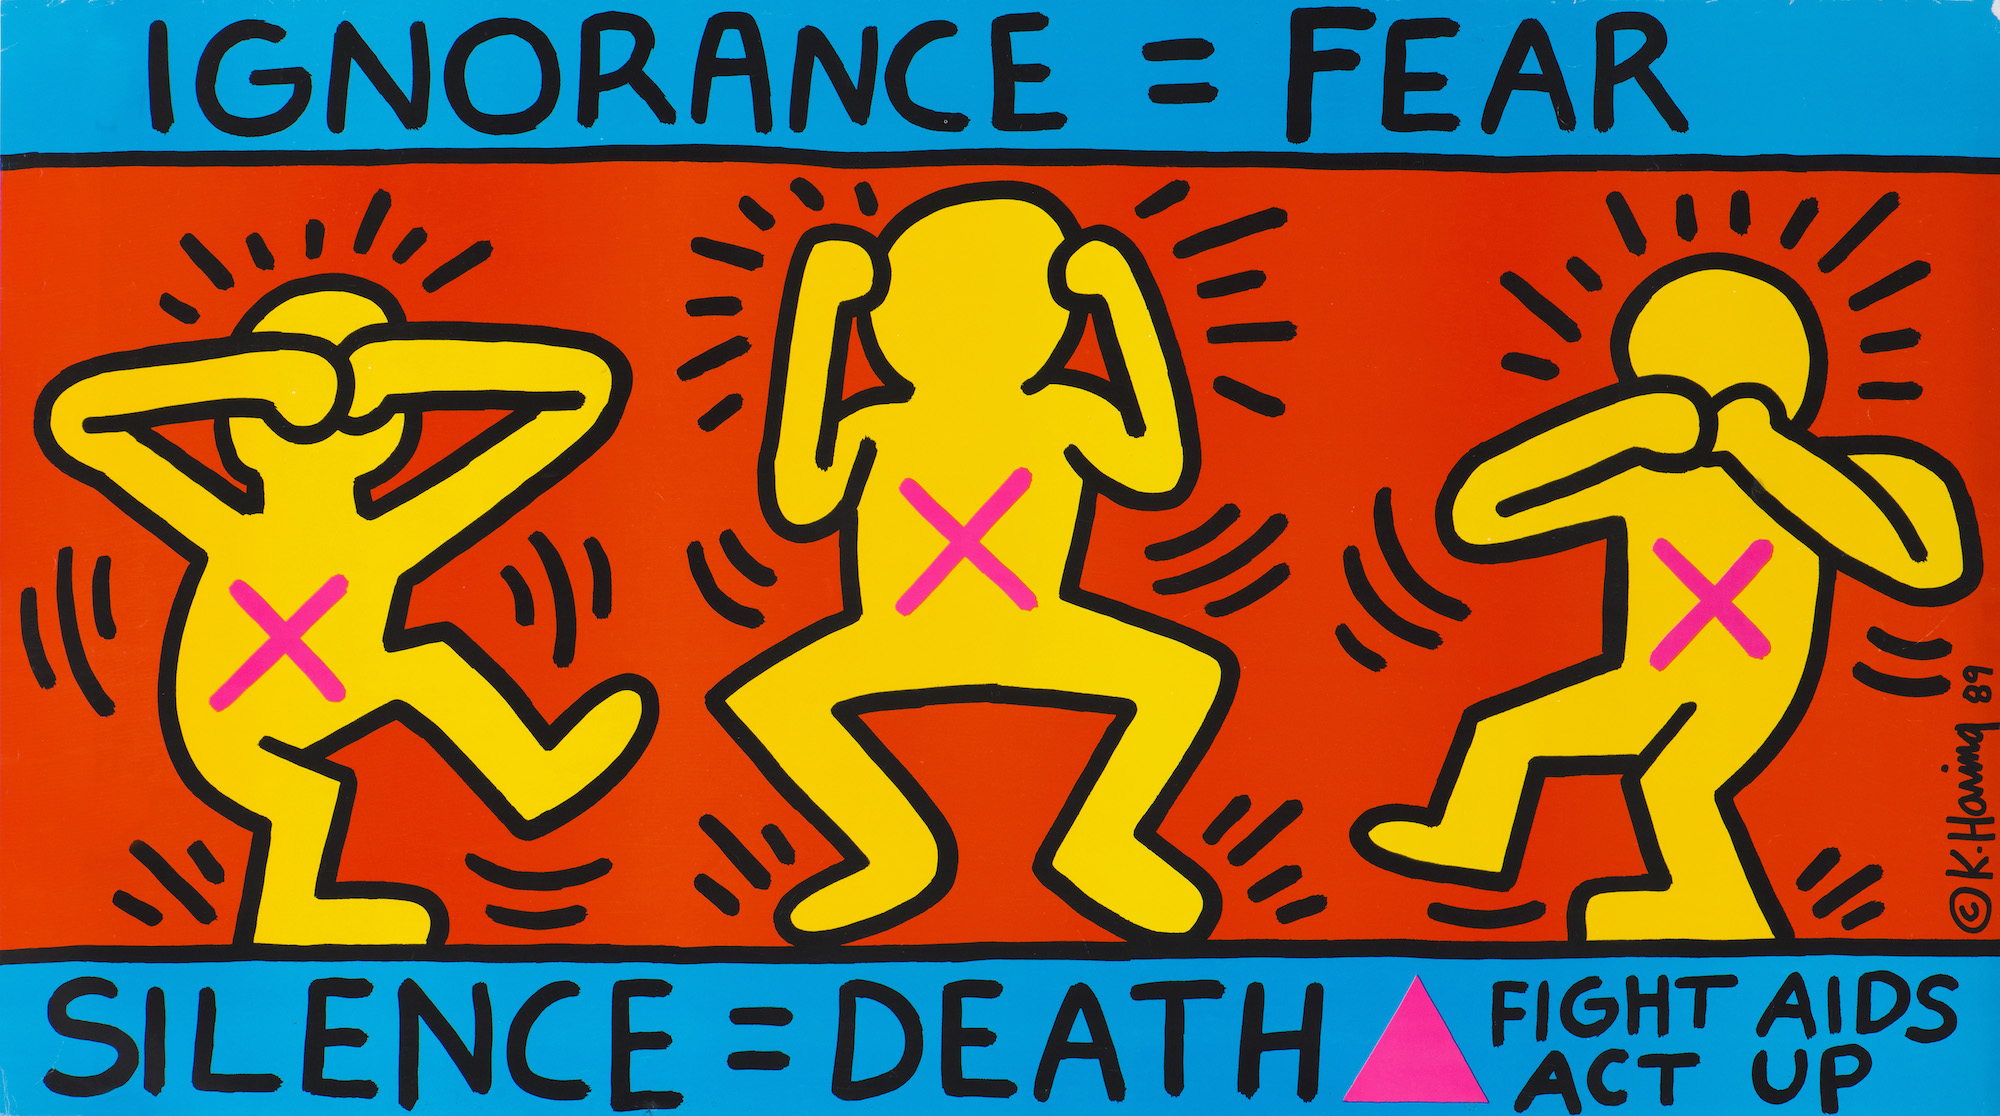 Keith Haring, Ignorance = Fear, 1989. © Keith Haring Foundation/ Collection Noirmontartproduction, Paris